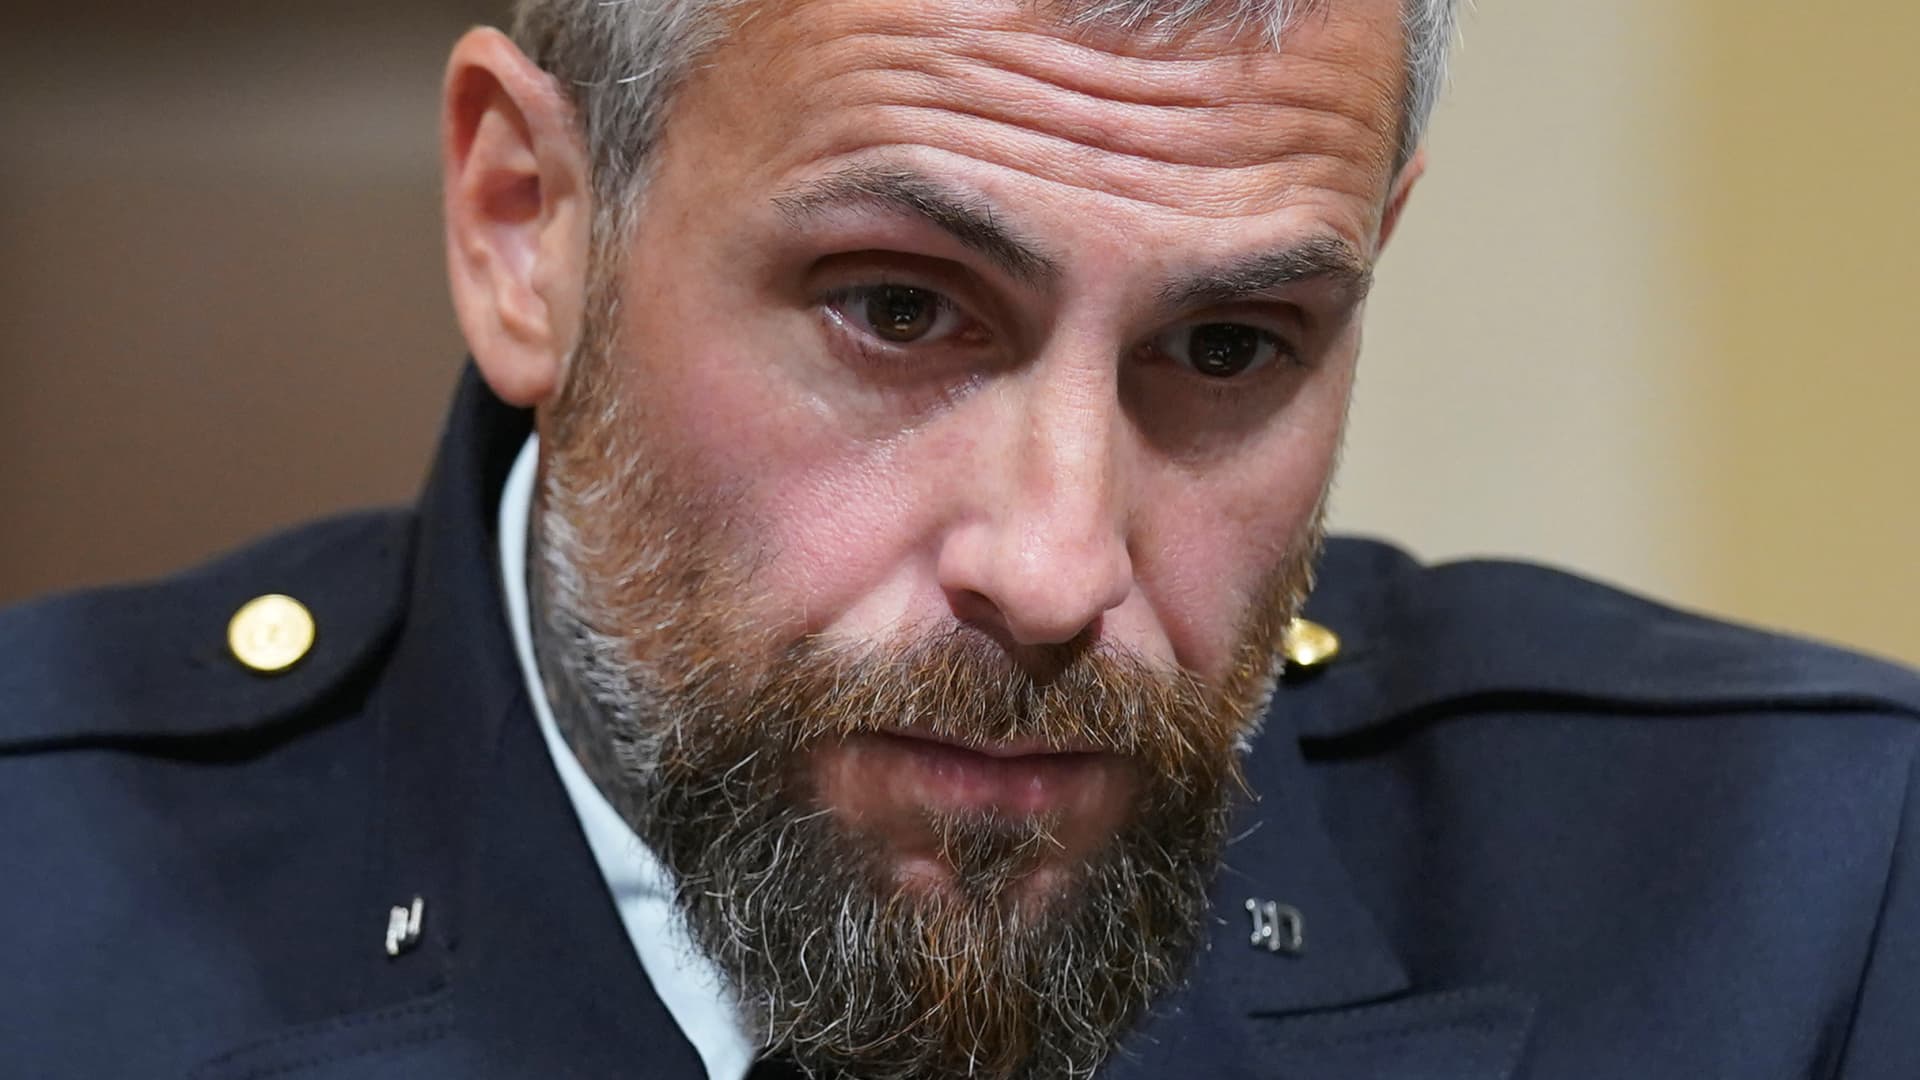 Washington Metropolitan Police Department officer Michael Fanone listens to testimony during the House select committee hearing on the Jan. 6 attack on Capitol Hill in Washington, U.S., July 27, 2021.